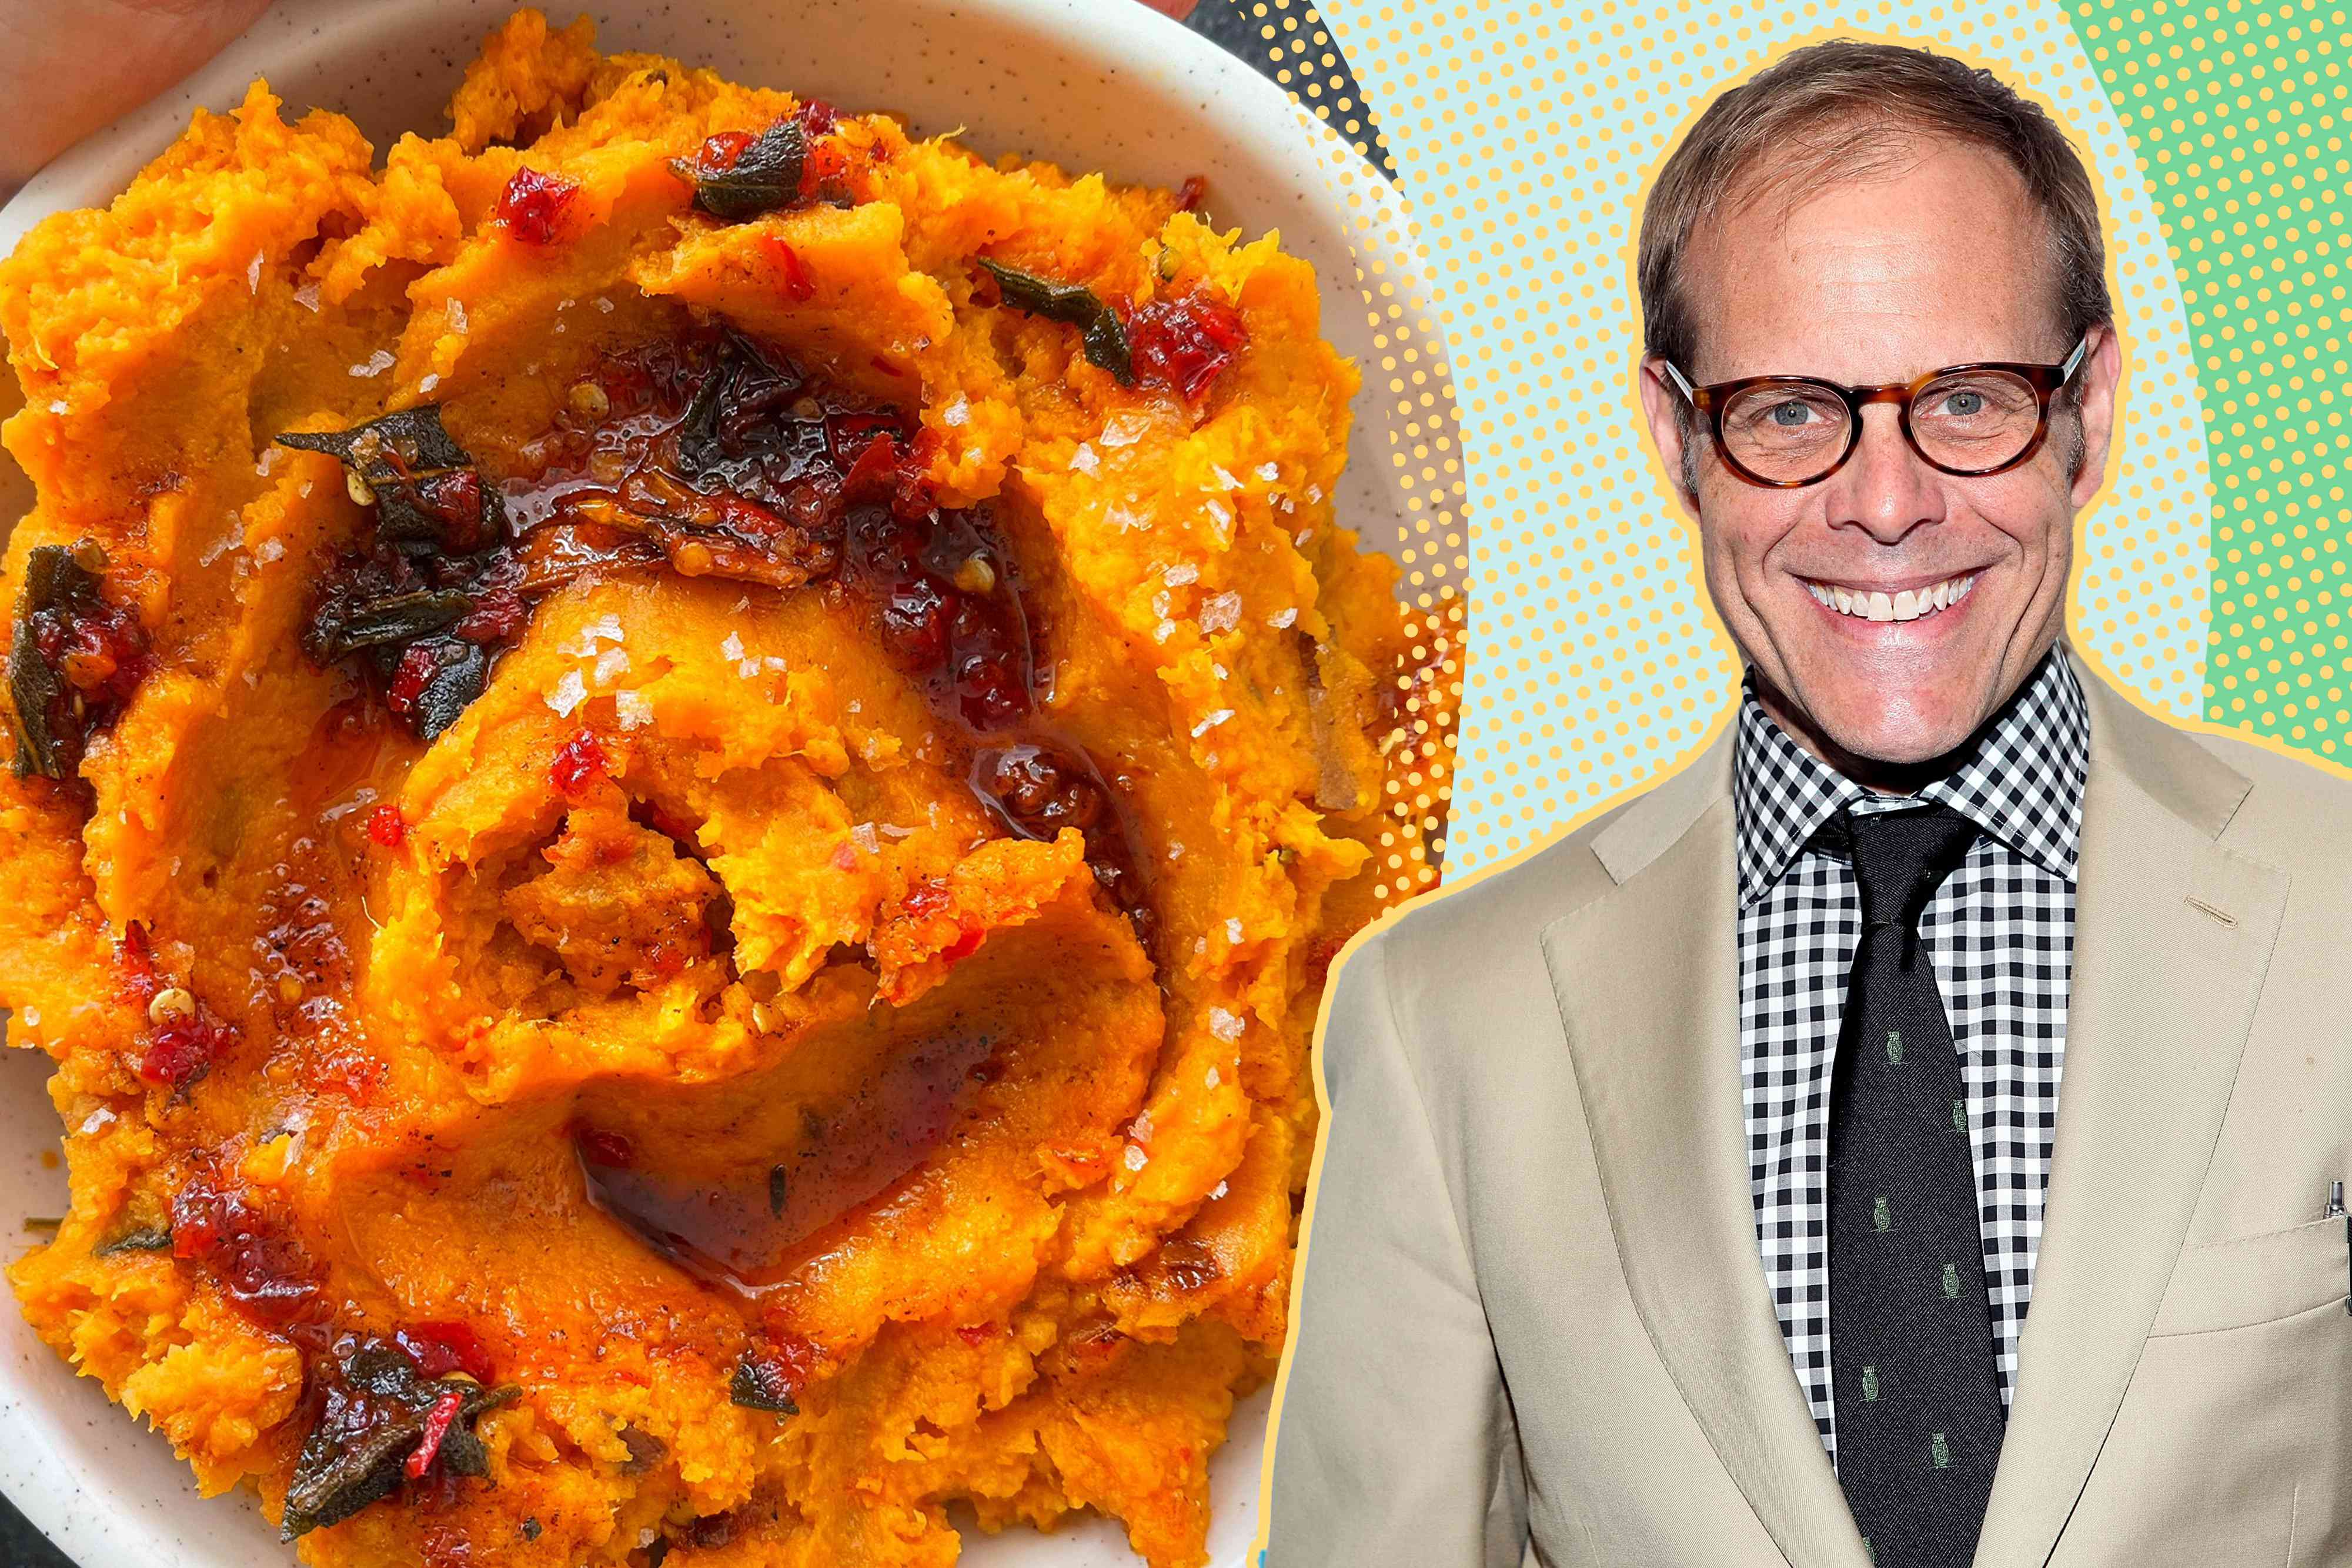 alton brown’s 3-ingredient side dish is my forever favorite